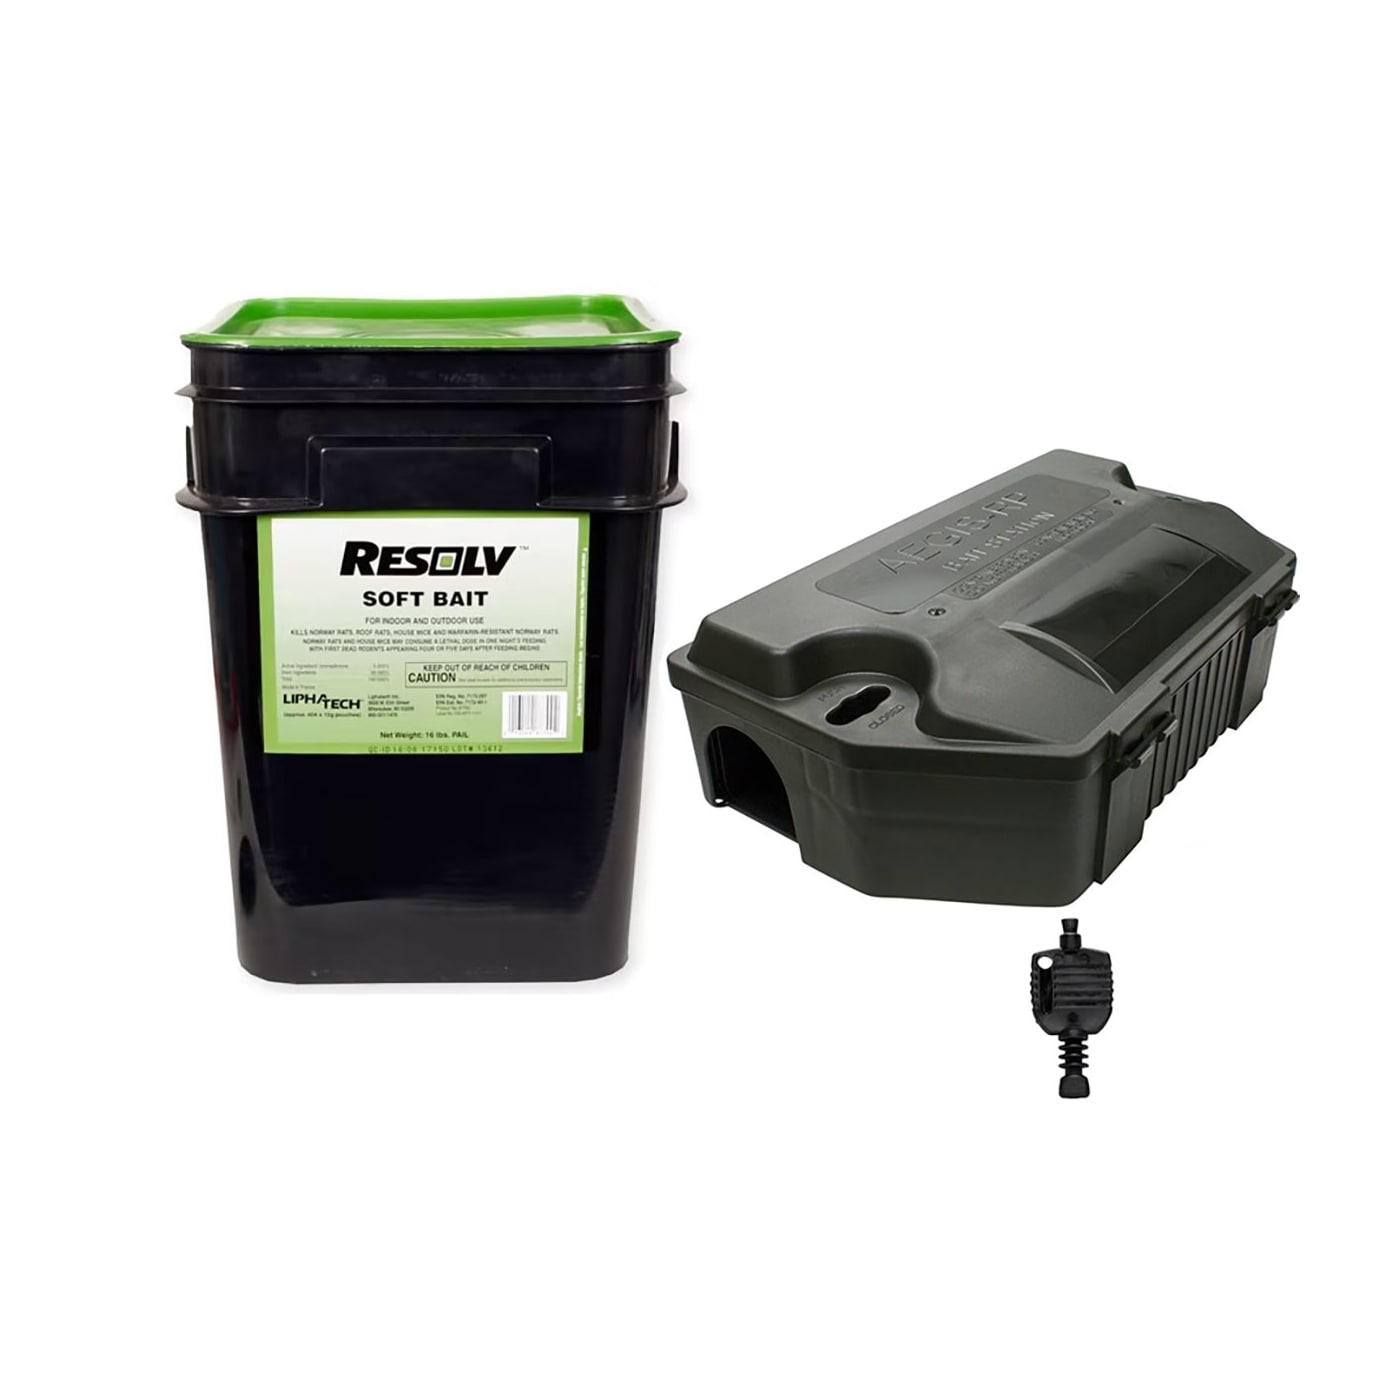 Protecta Bait Stations with Resolv Soft Bait Kits